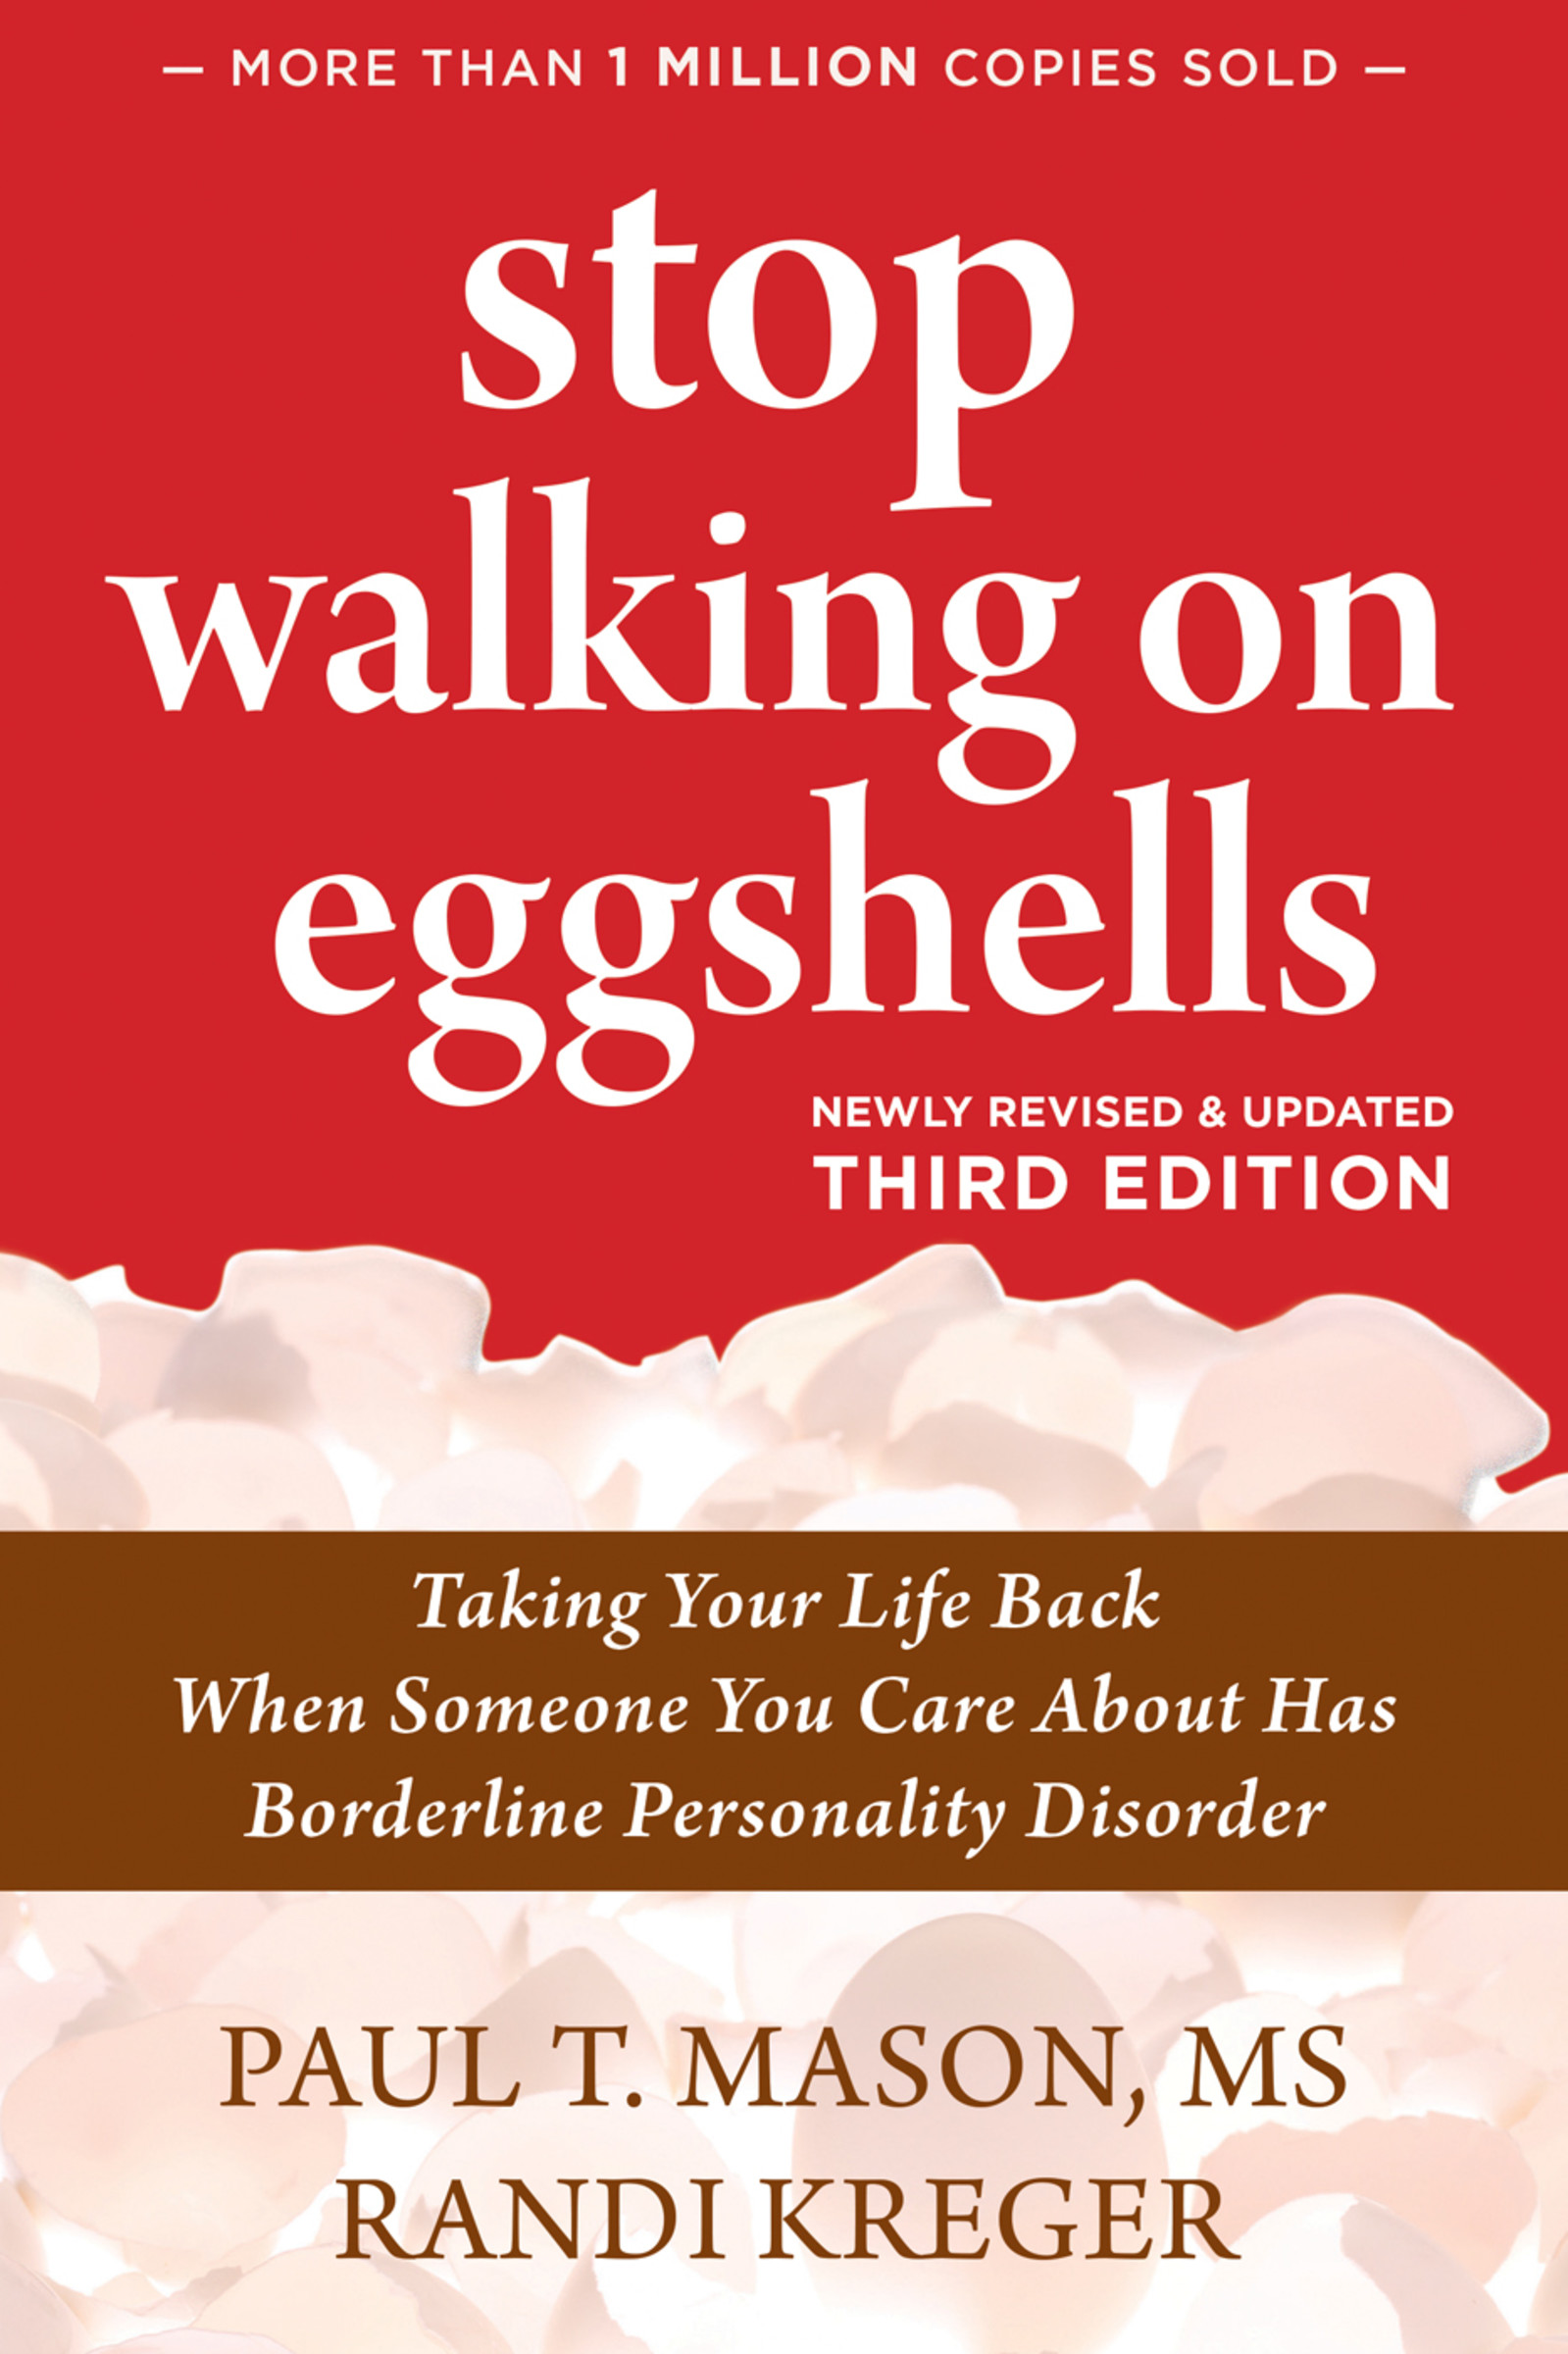 Stop Walking on Eggshells : Taking Your Life Back When Someone You Care About Has Borderline Personality Disorder | Psychology & Self-Improvement